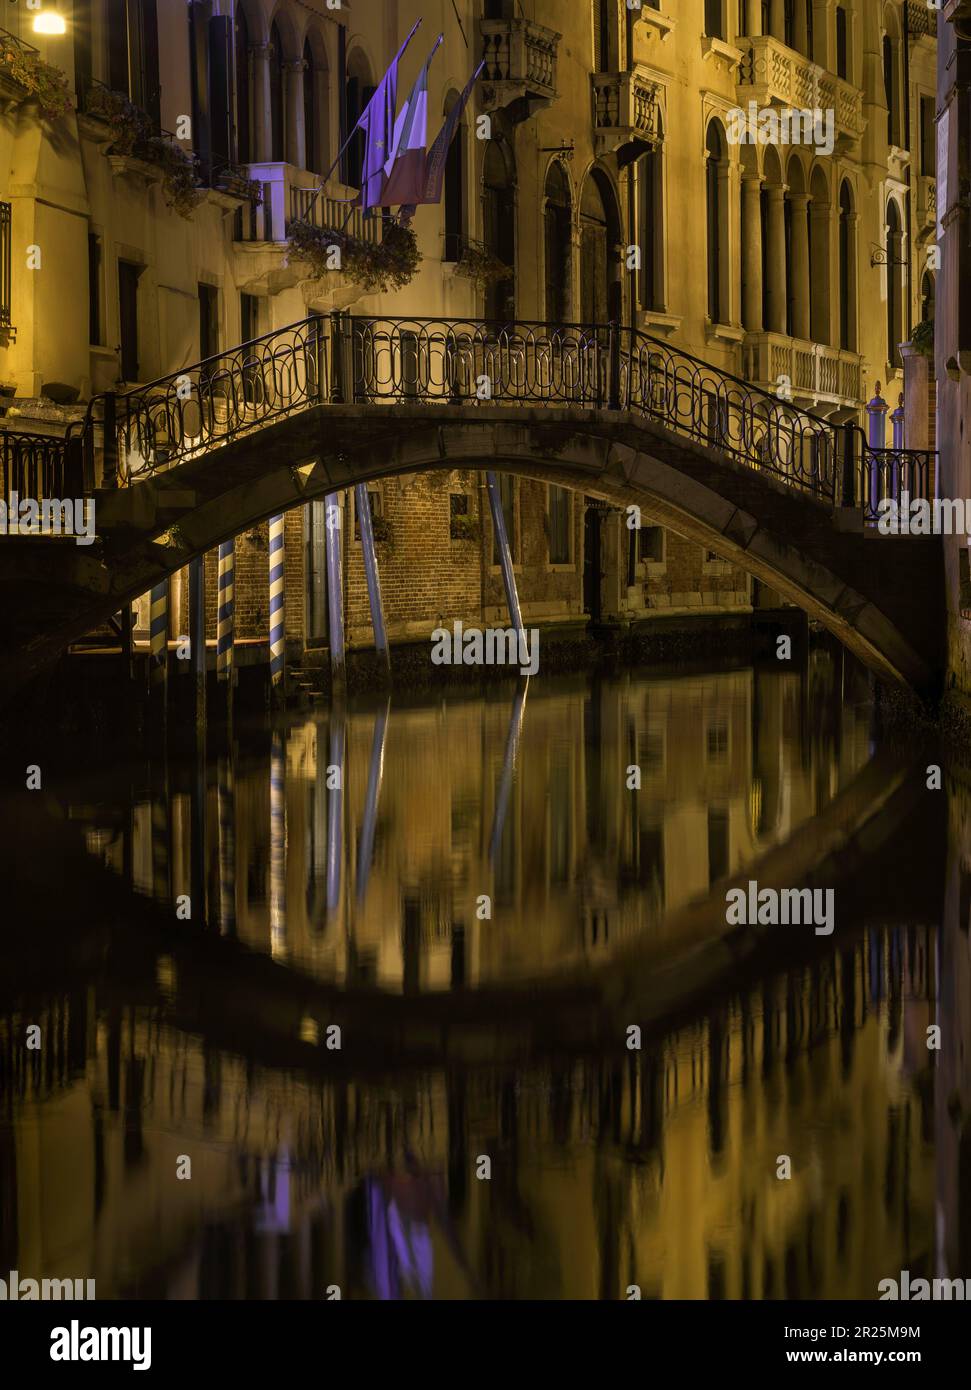 Bridge over a canal in Venice at night Stock Photo